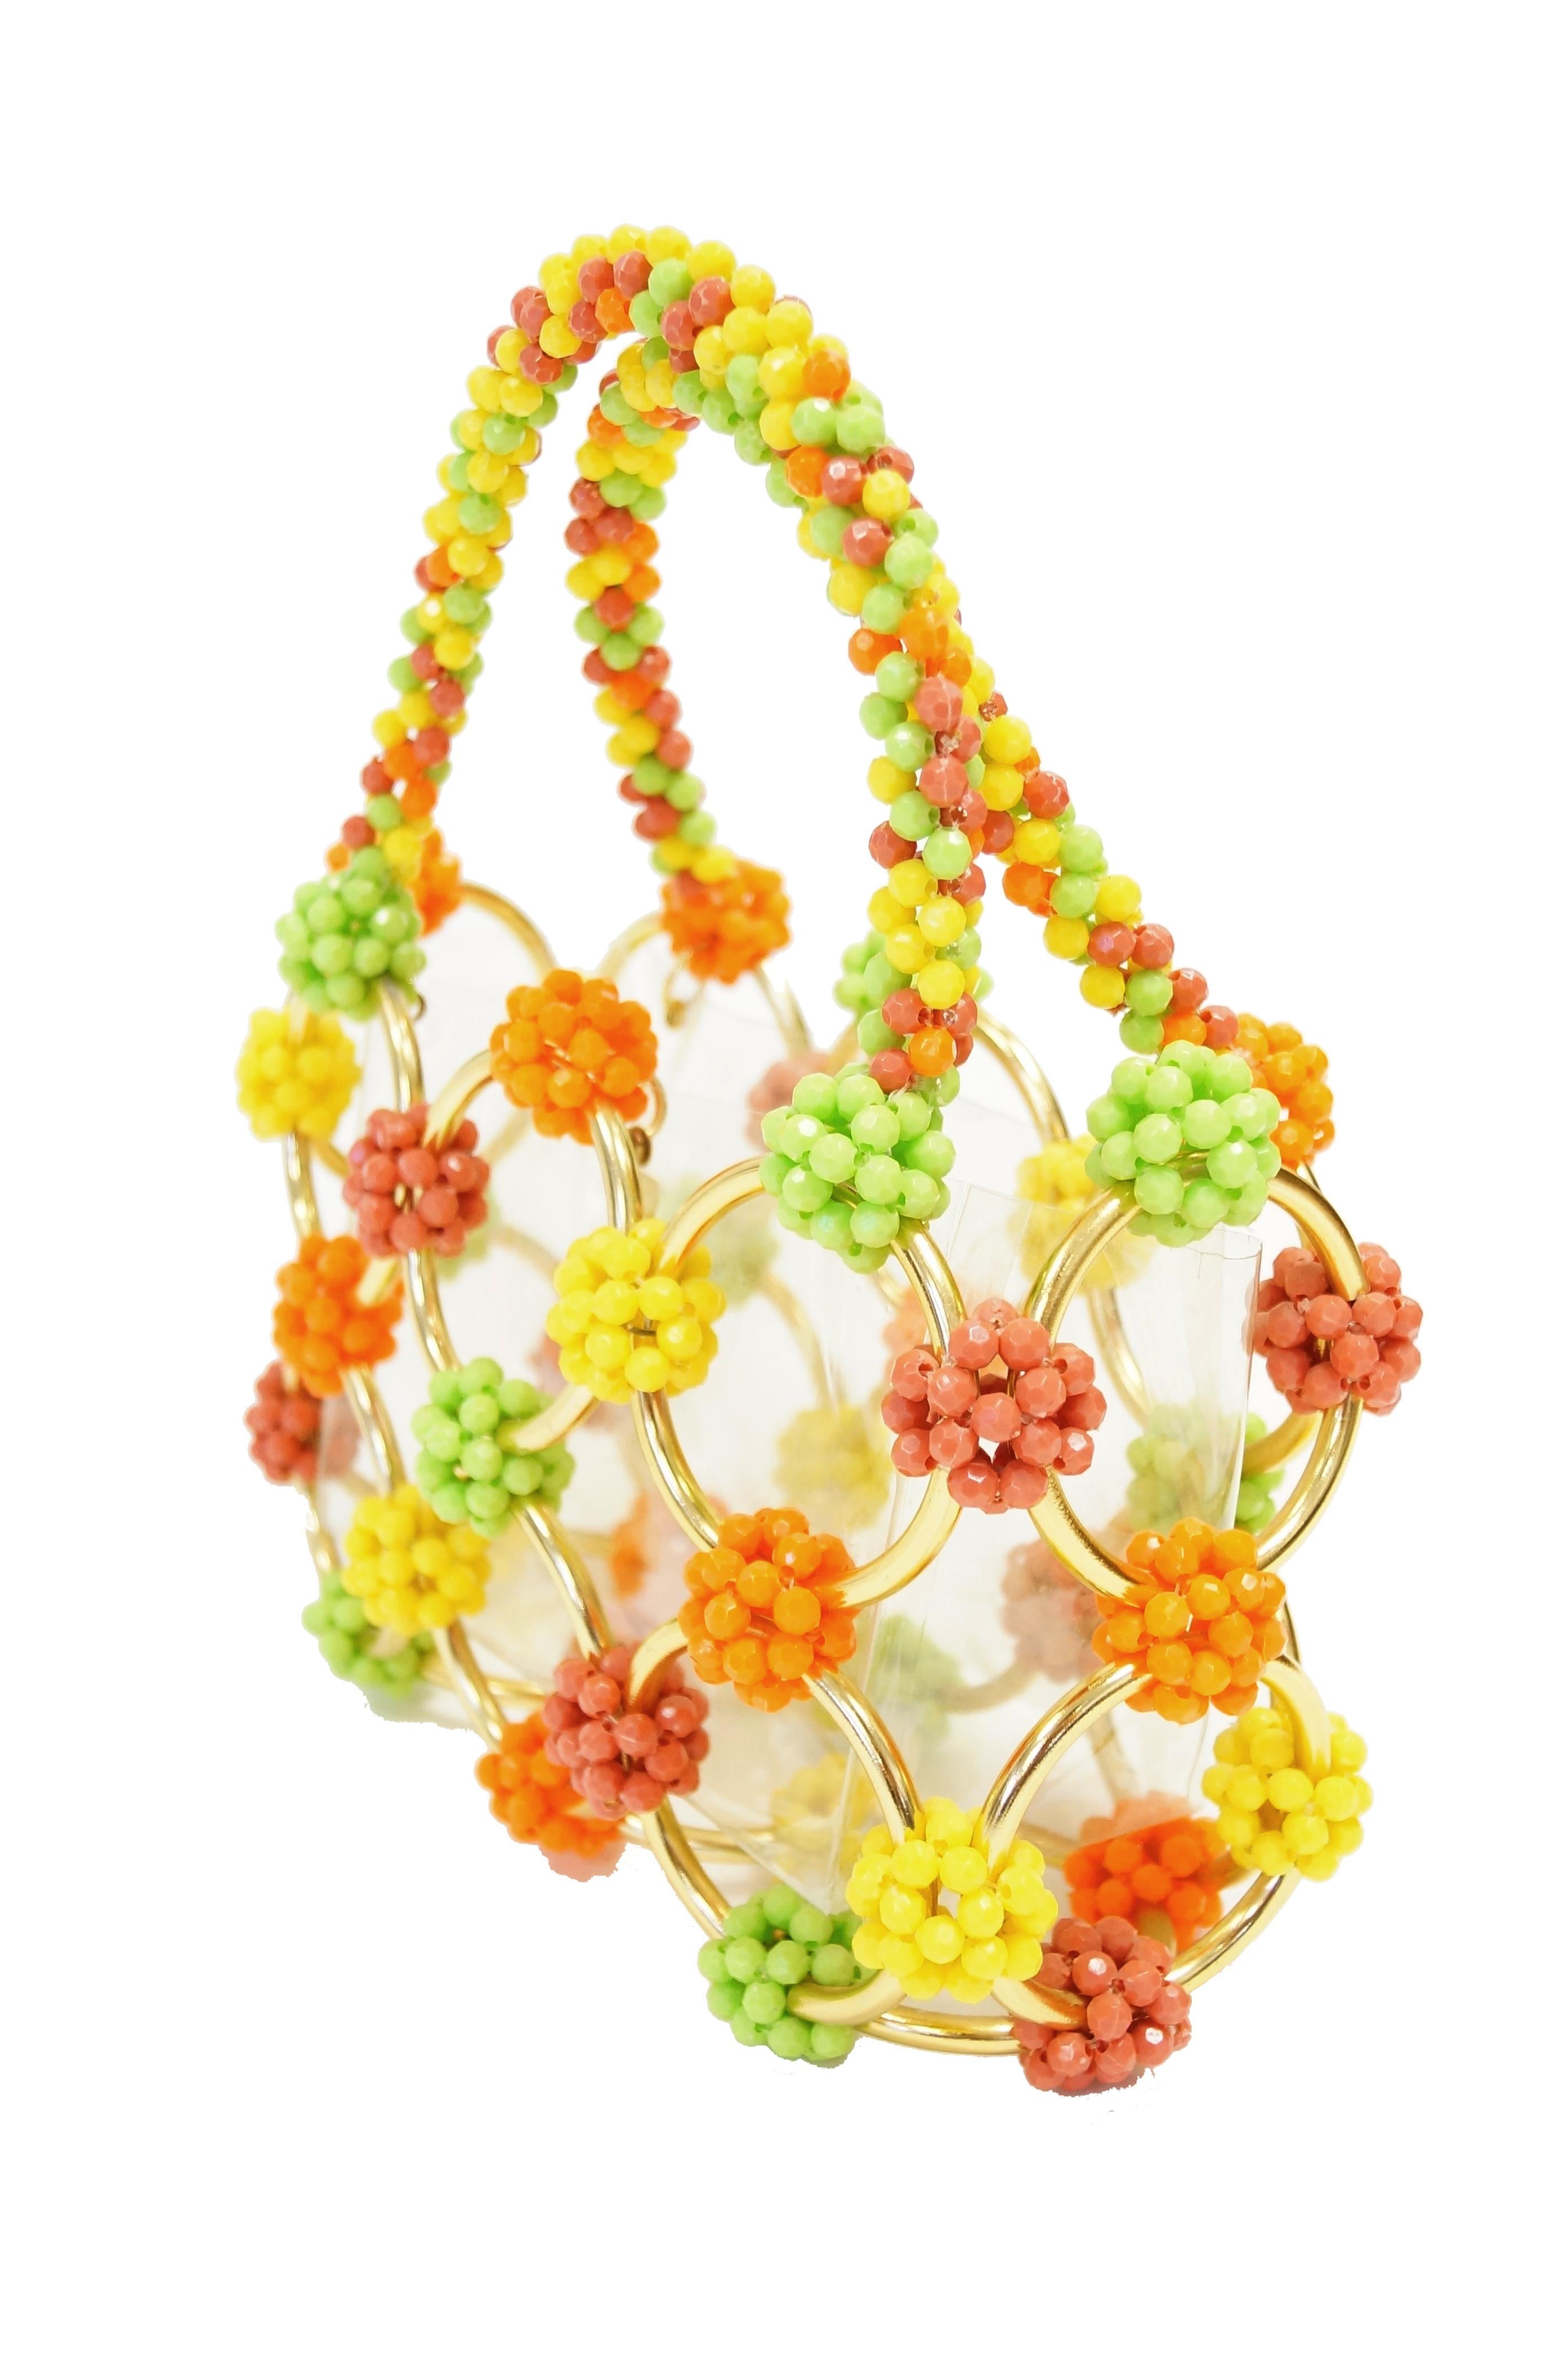 Playful and nearly impossible to find, comes this hand Italian made beaded handwork bag! This fabulous bag is composed of bright candy- like clusters of multifaceted beads and round gold - tone hoops.  The handbag has a top handle made entirely of